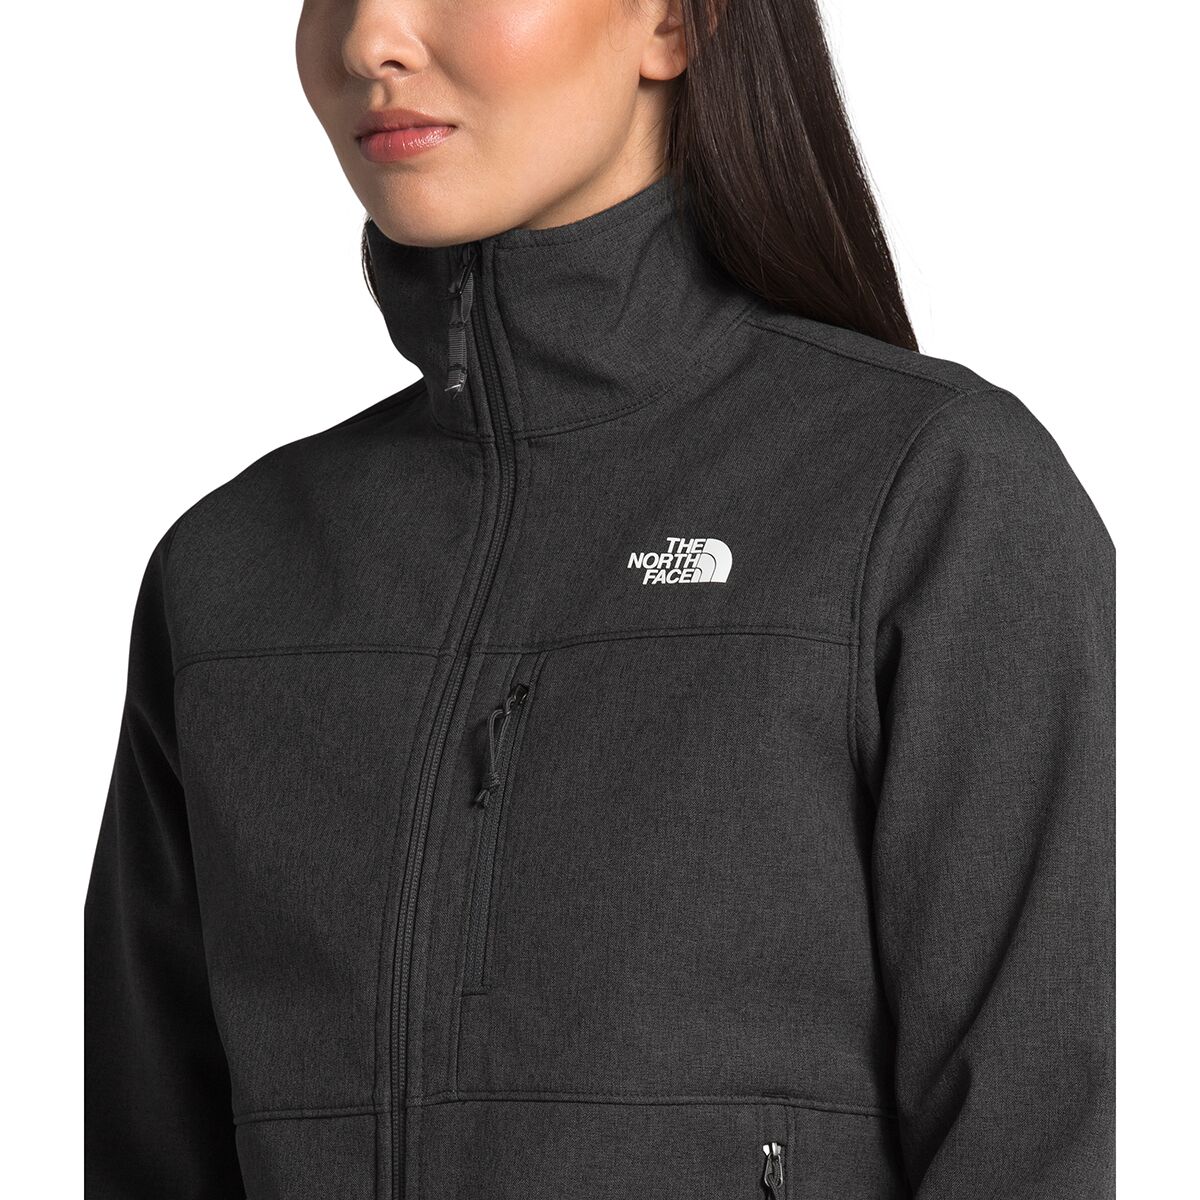 north face apex bionic jacket sale womens